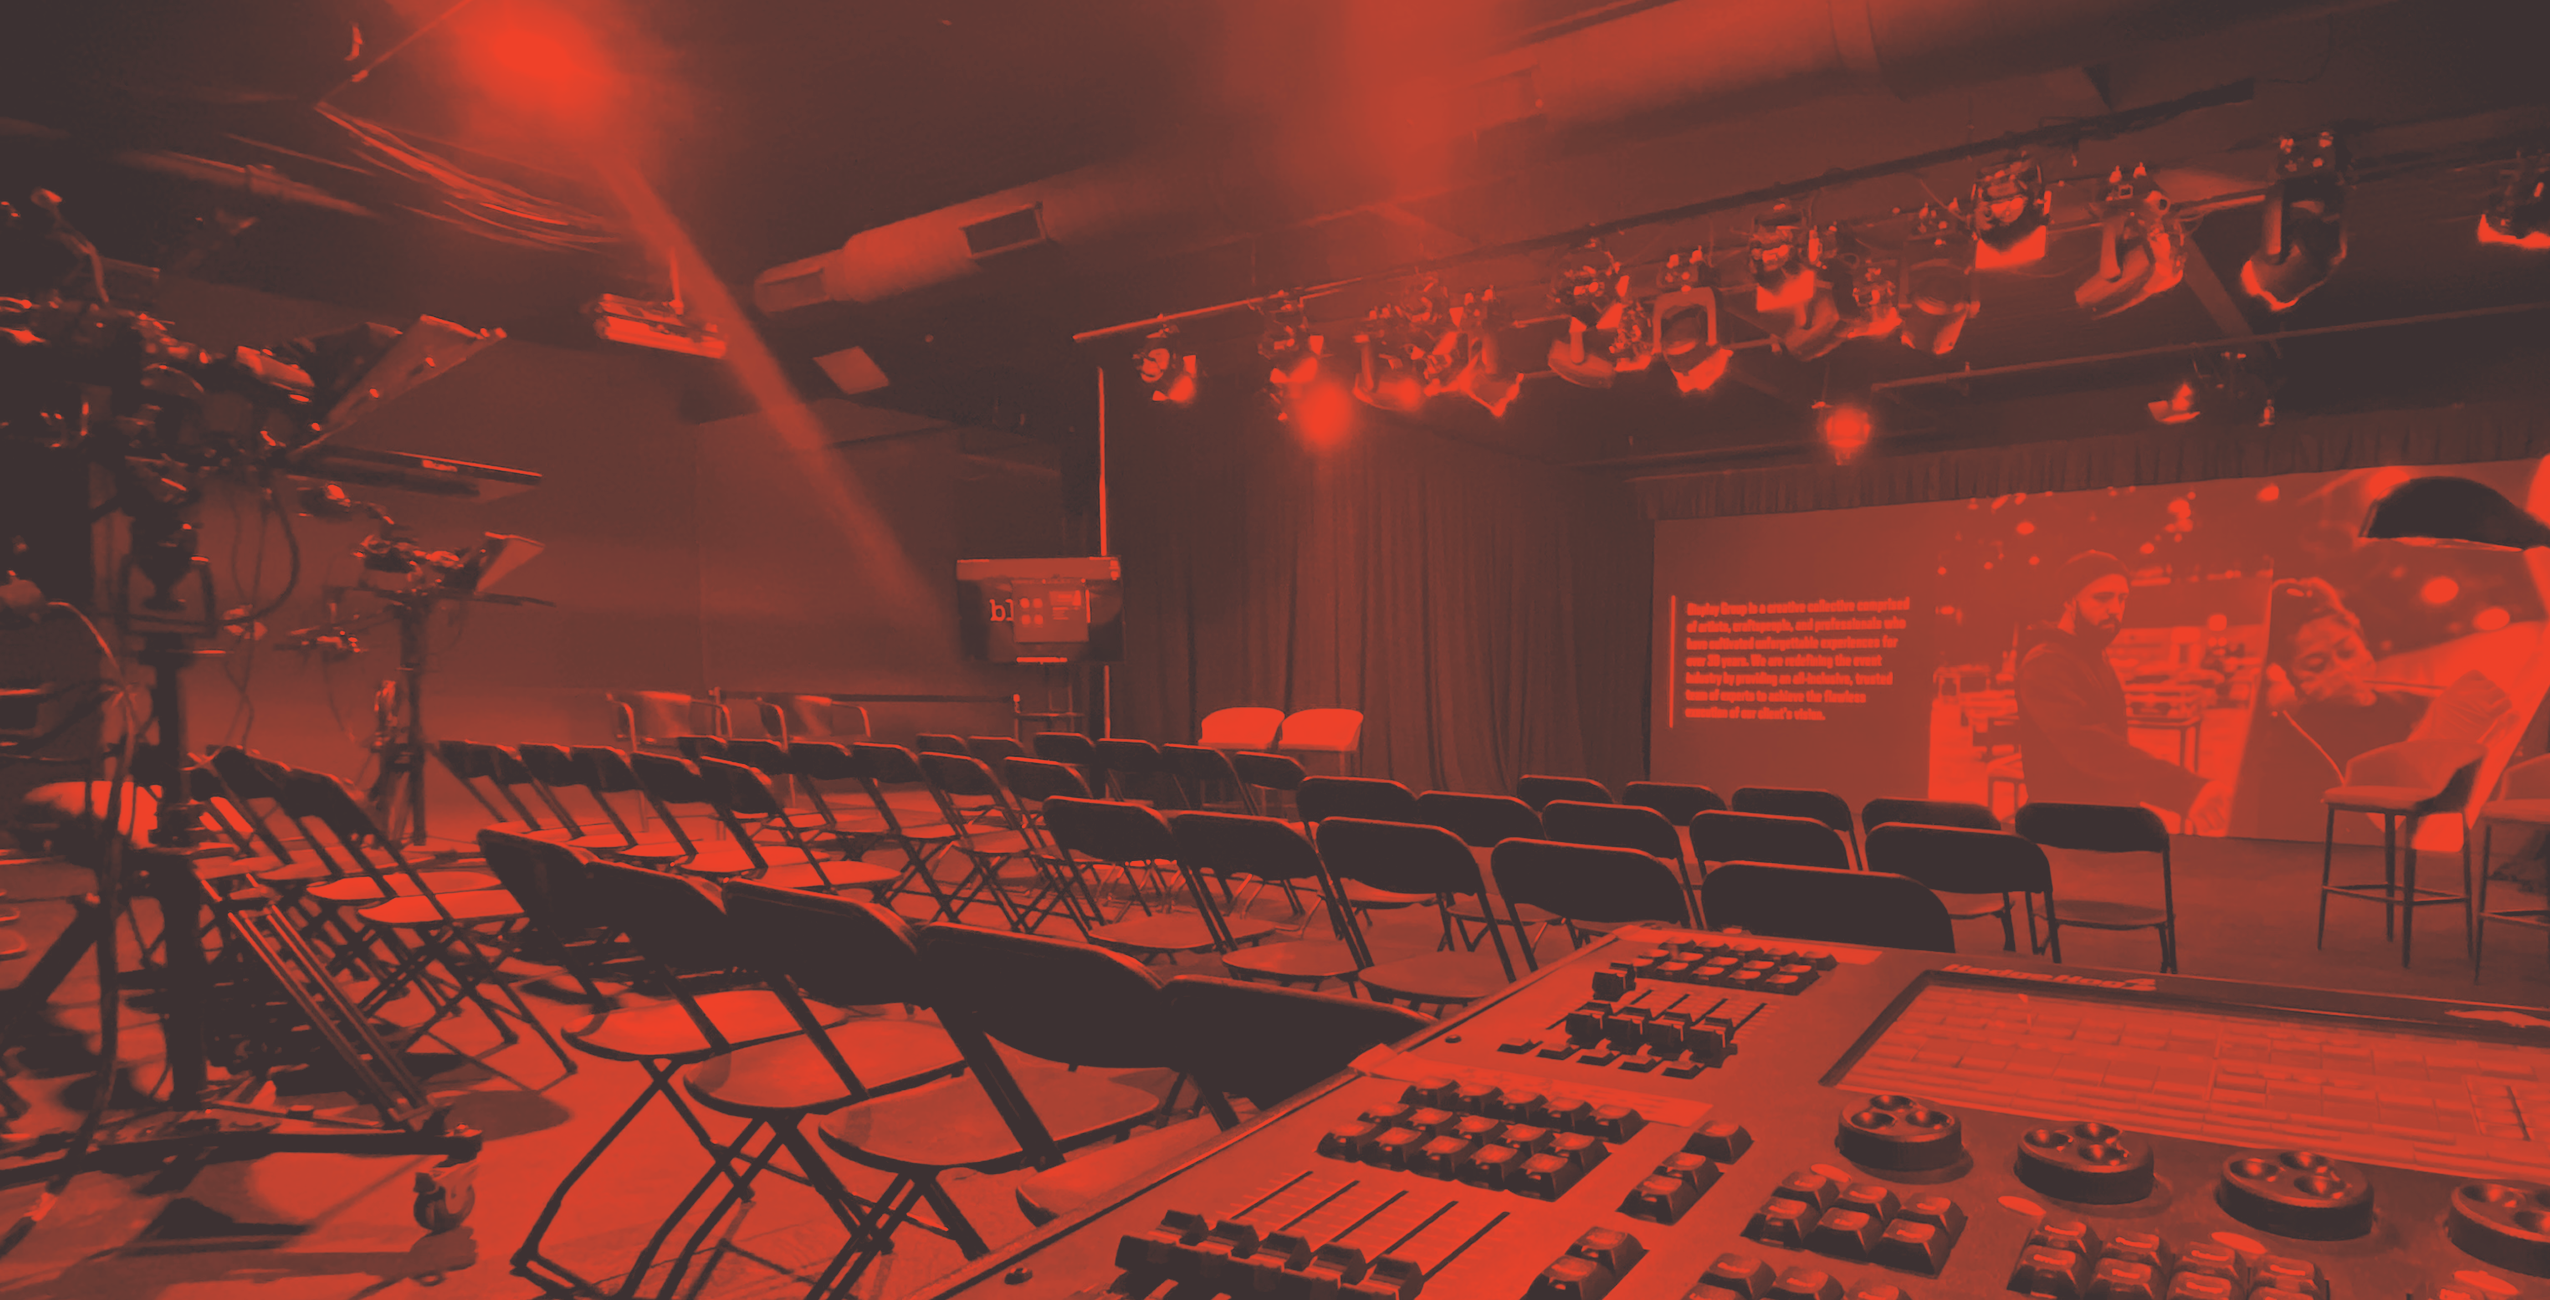 Landscape brand page header image shows Building 22 broadcast studio with lights, chairs, and LED screen behind a duotone red overlay treatment.